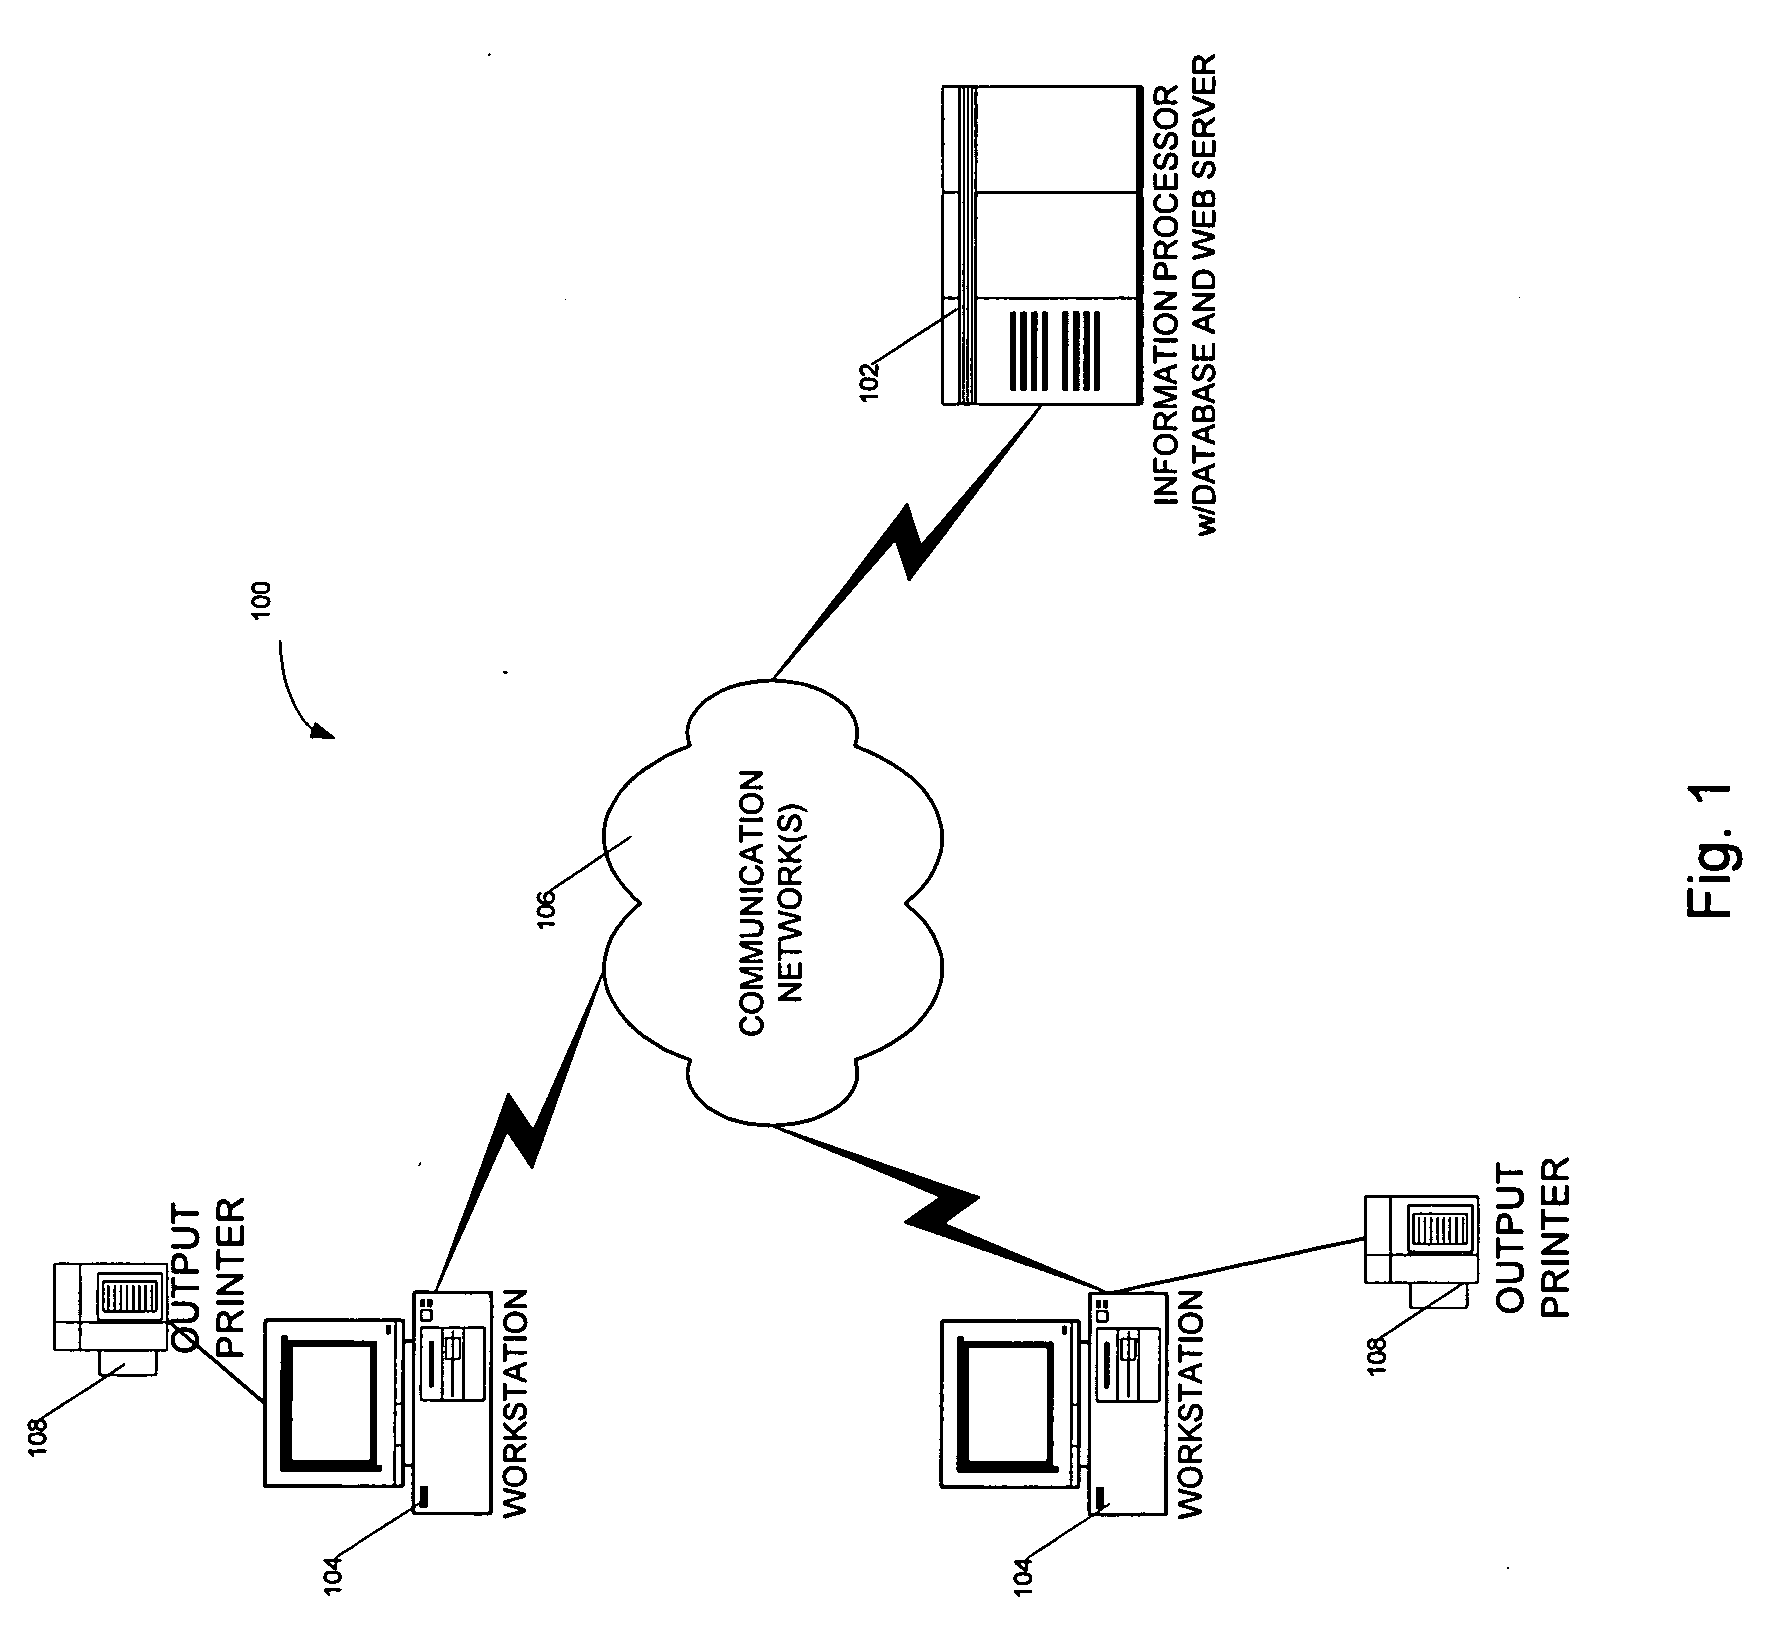 System and method for managing personnel and resources in gaming establishment